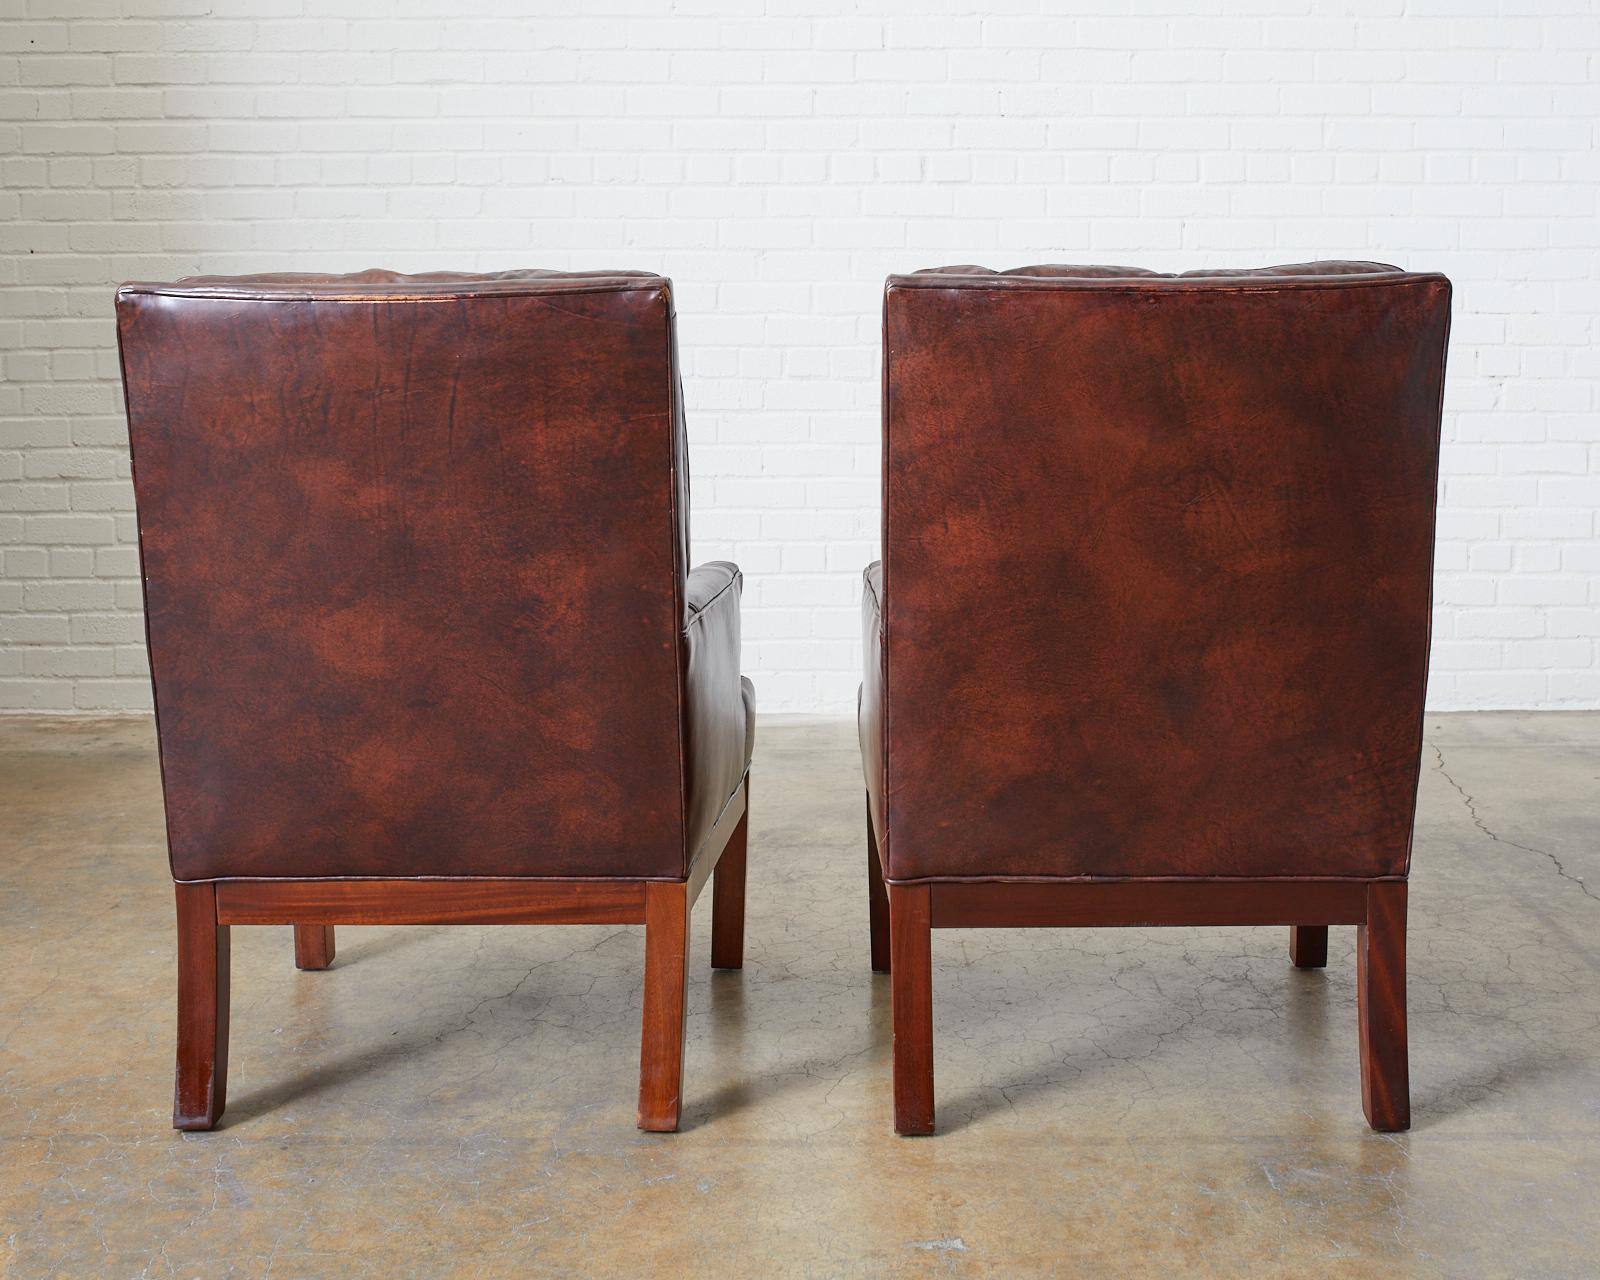 Pair of Midcentury Tufted Leather Library Chairs 8